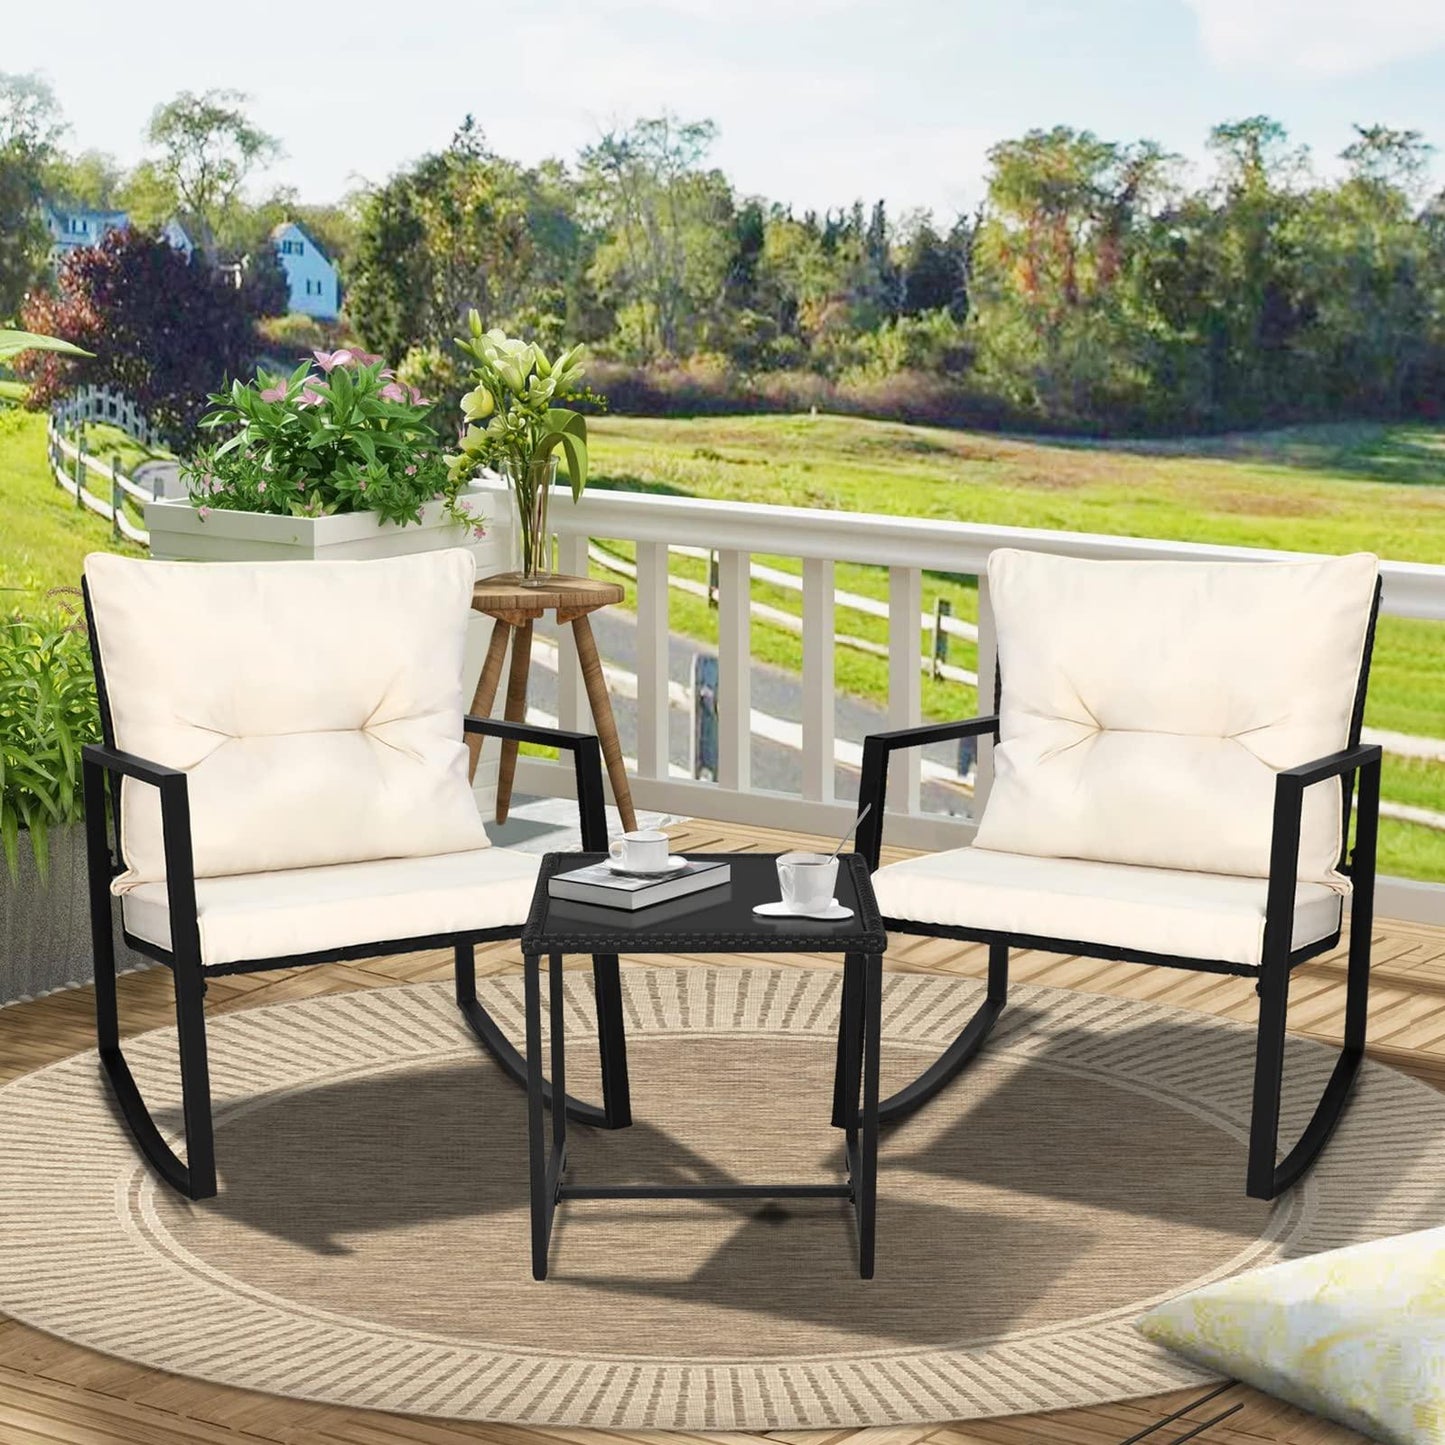 SUNCROWN 3 Piece Outdoor Rocking Bistro Set Black Wicker Furniture Porch Chairs Conversation Sets with Glass Coffee Table, Beige - CookCave